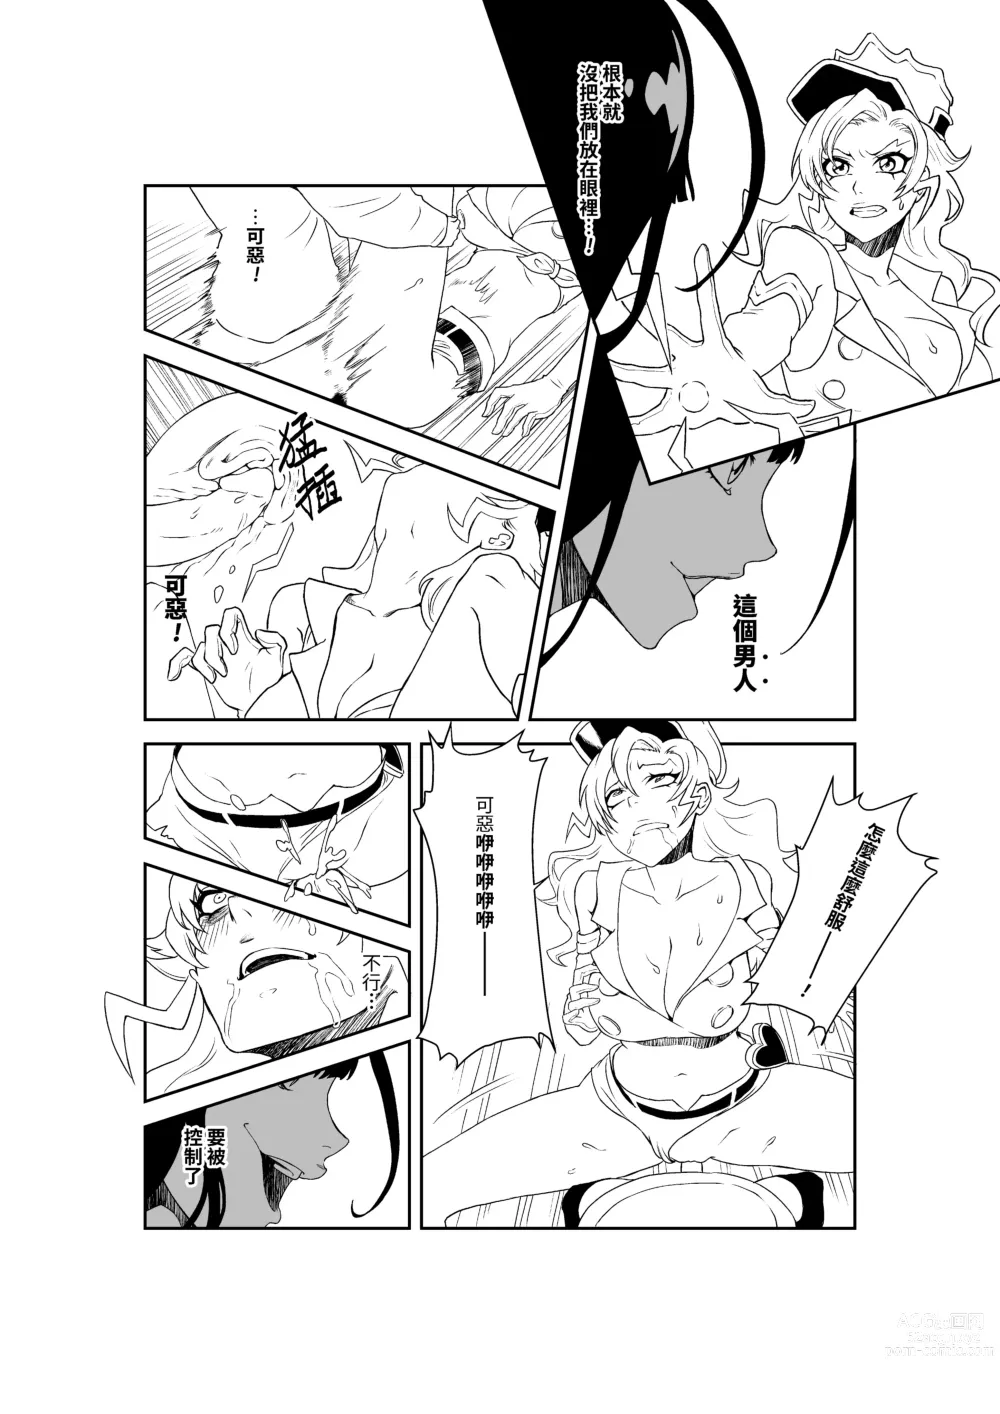 Page 9 of doujinshi Grim Reaper (18P) Bambietta/Candice Ft. Giselle Smelly Semen